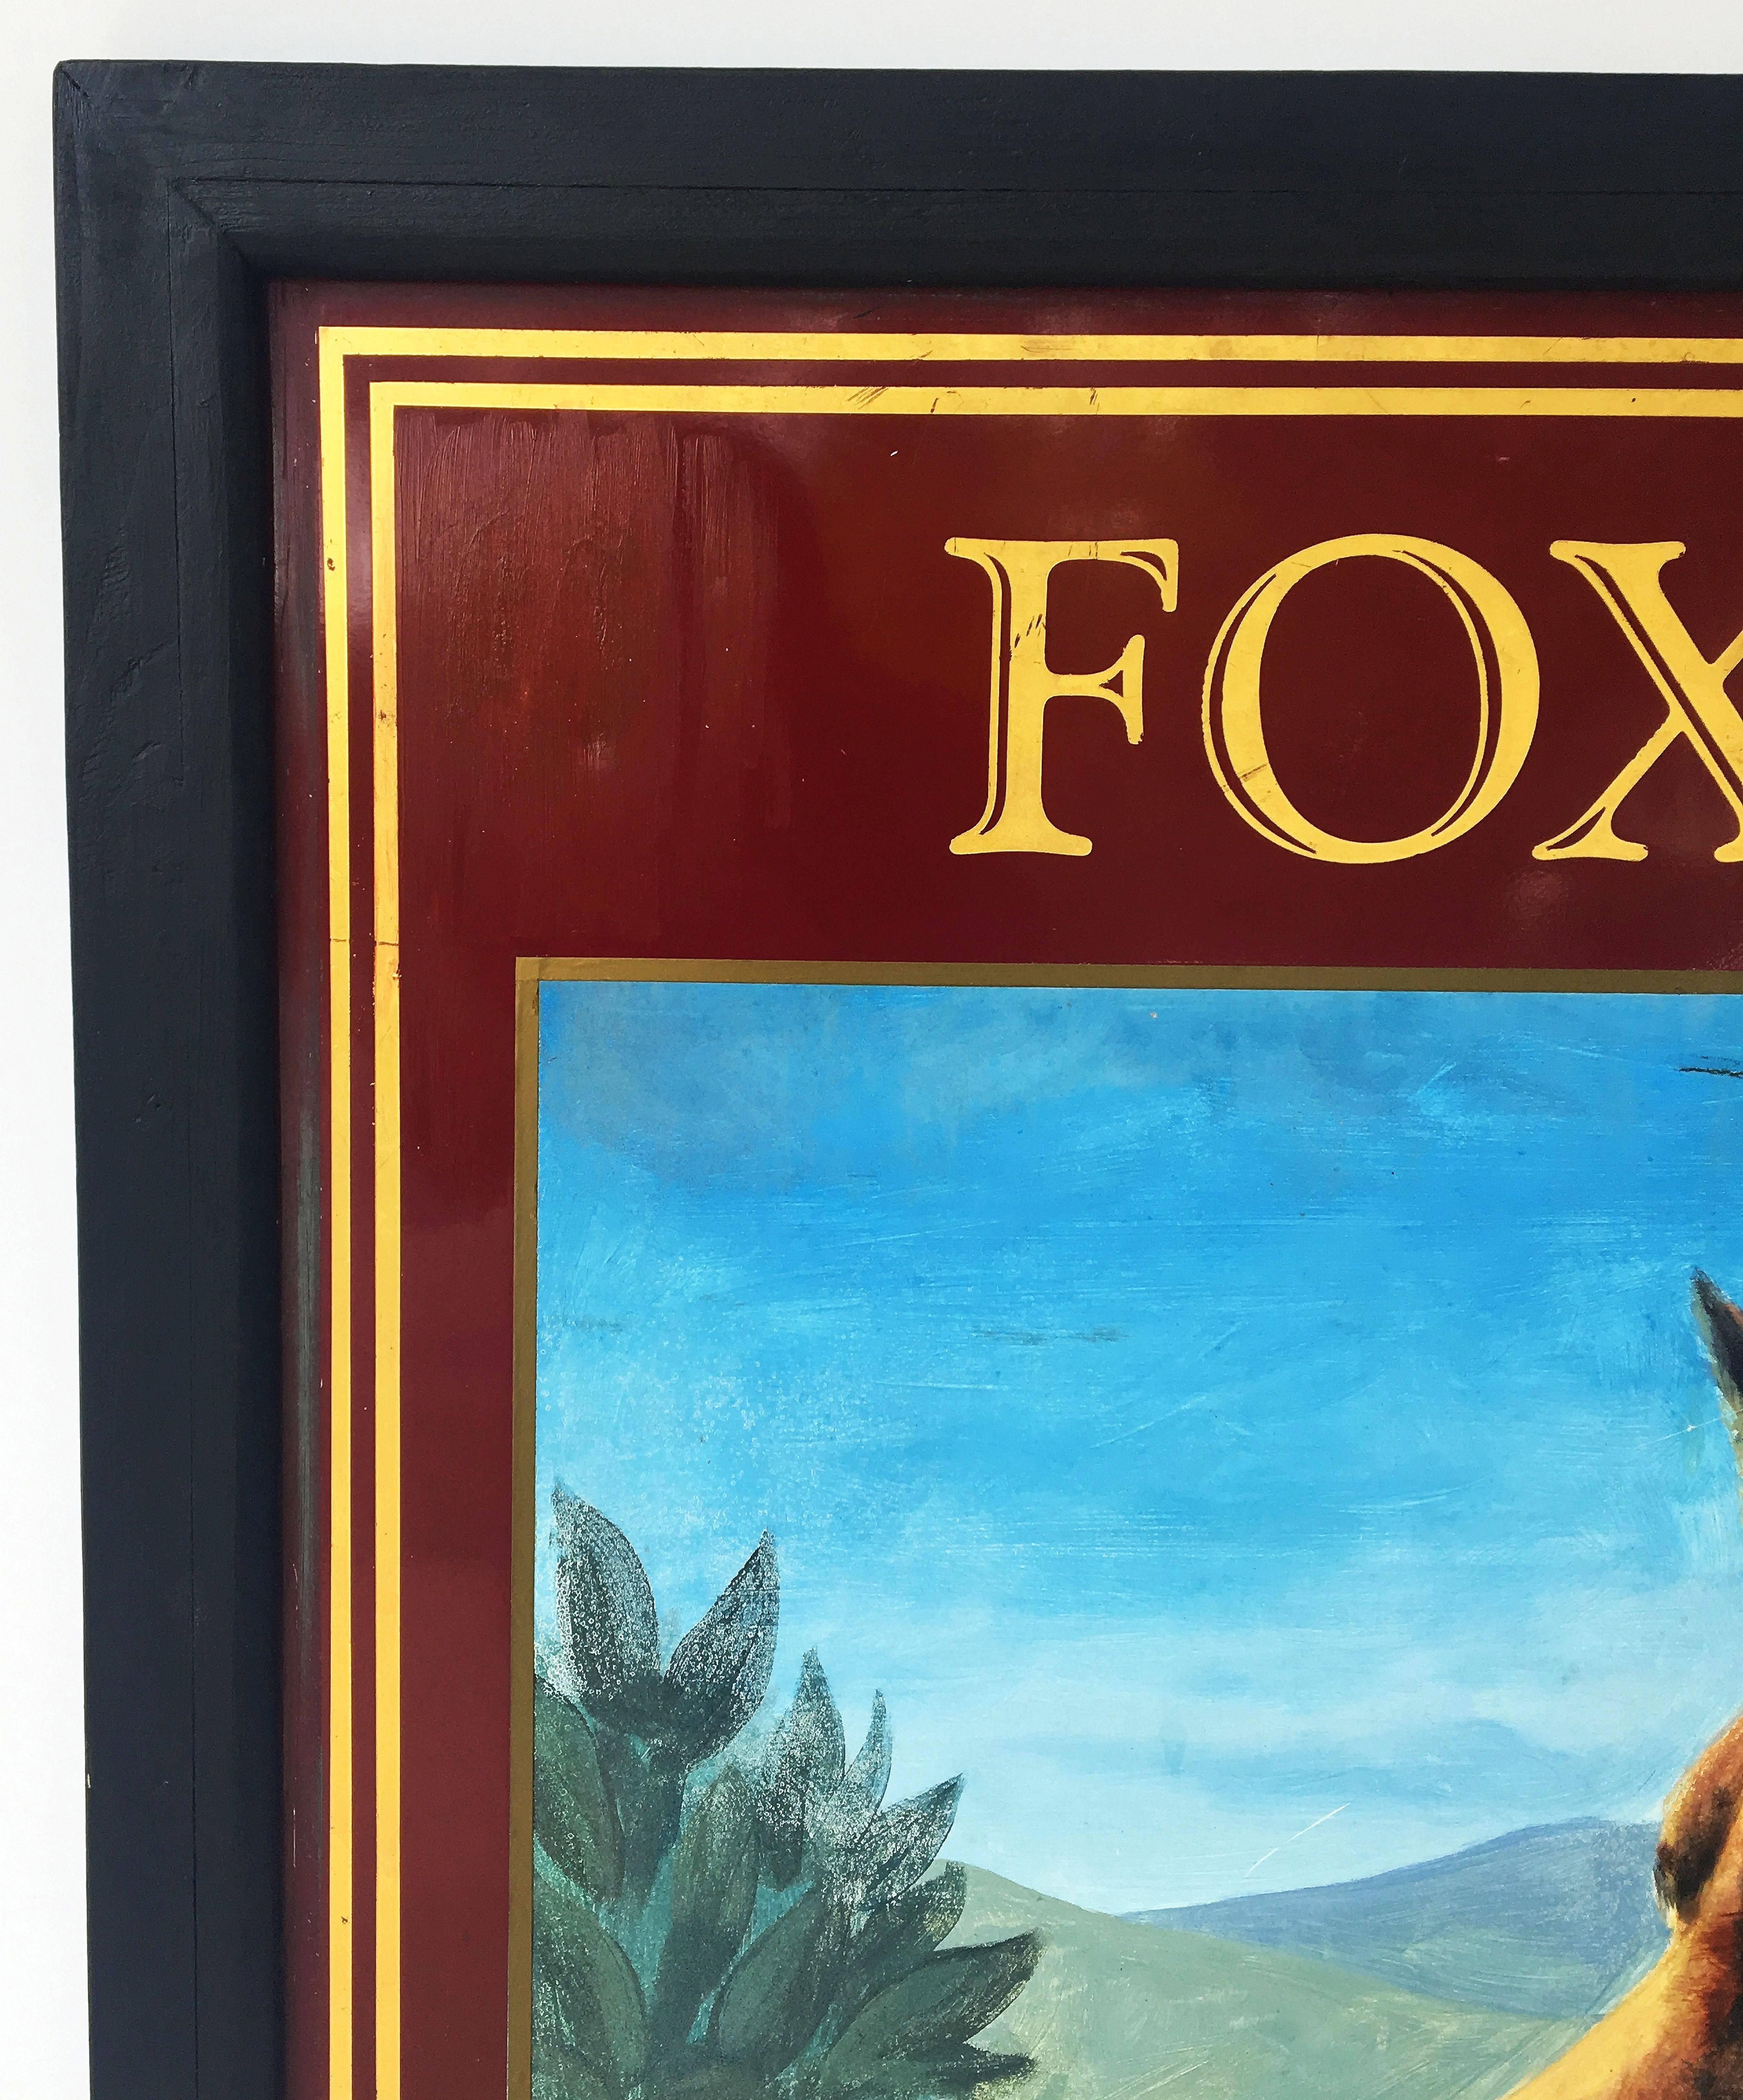 An authentic English pub sign (one-sided) featuring a painting of fox among shrubbery, entitled: Fox Inn - Pubmaster

A very fine example of vintage advertising artwork, ready for display.